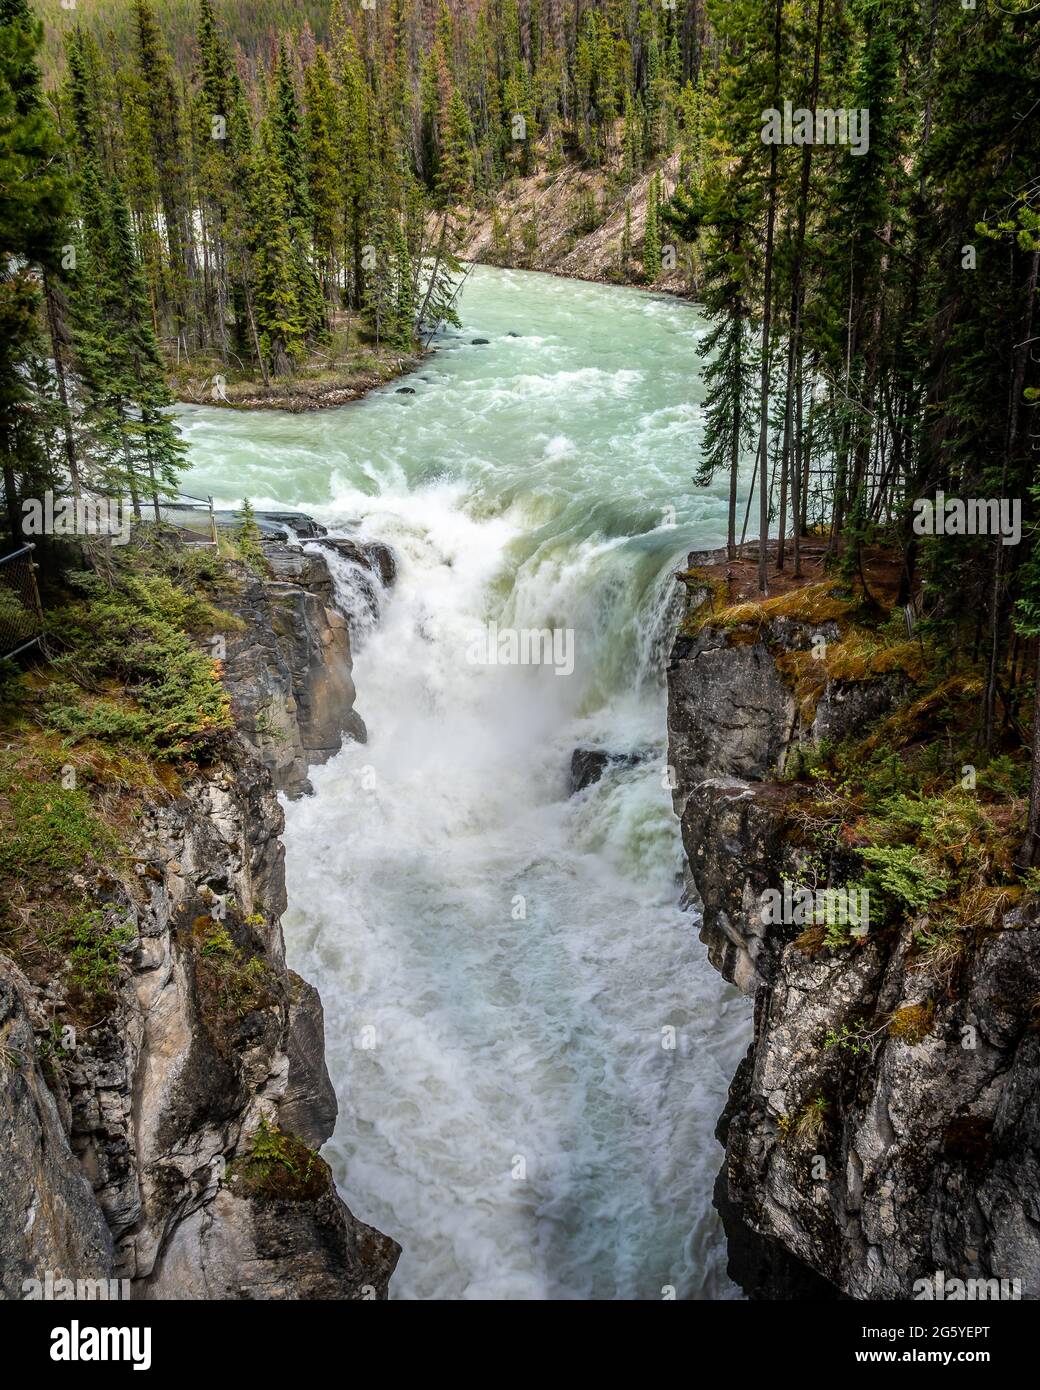 The turbulent turquoise water of the Sunwapta River as it tumbles down Sunwapta Falls in Jasper National Park in the Canadian Rocky Mountains Stock Photo